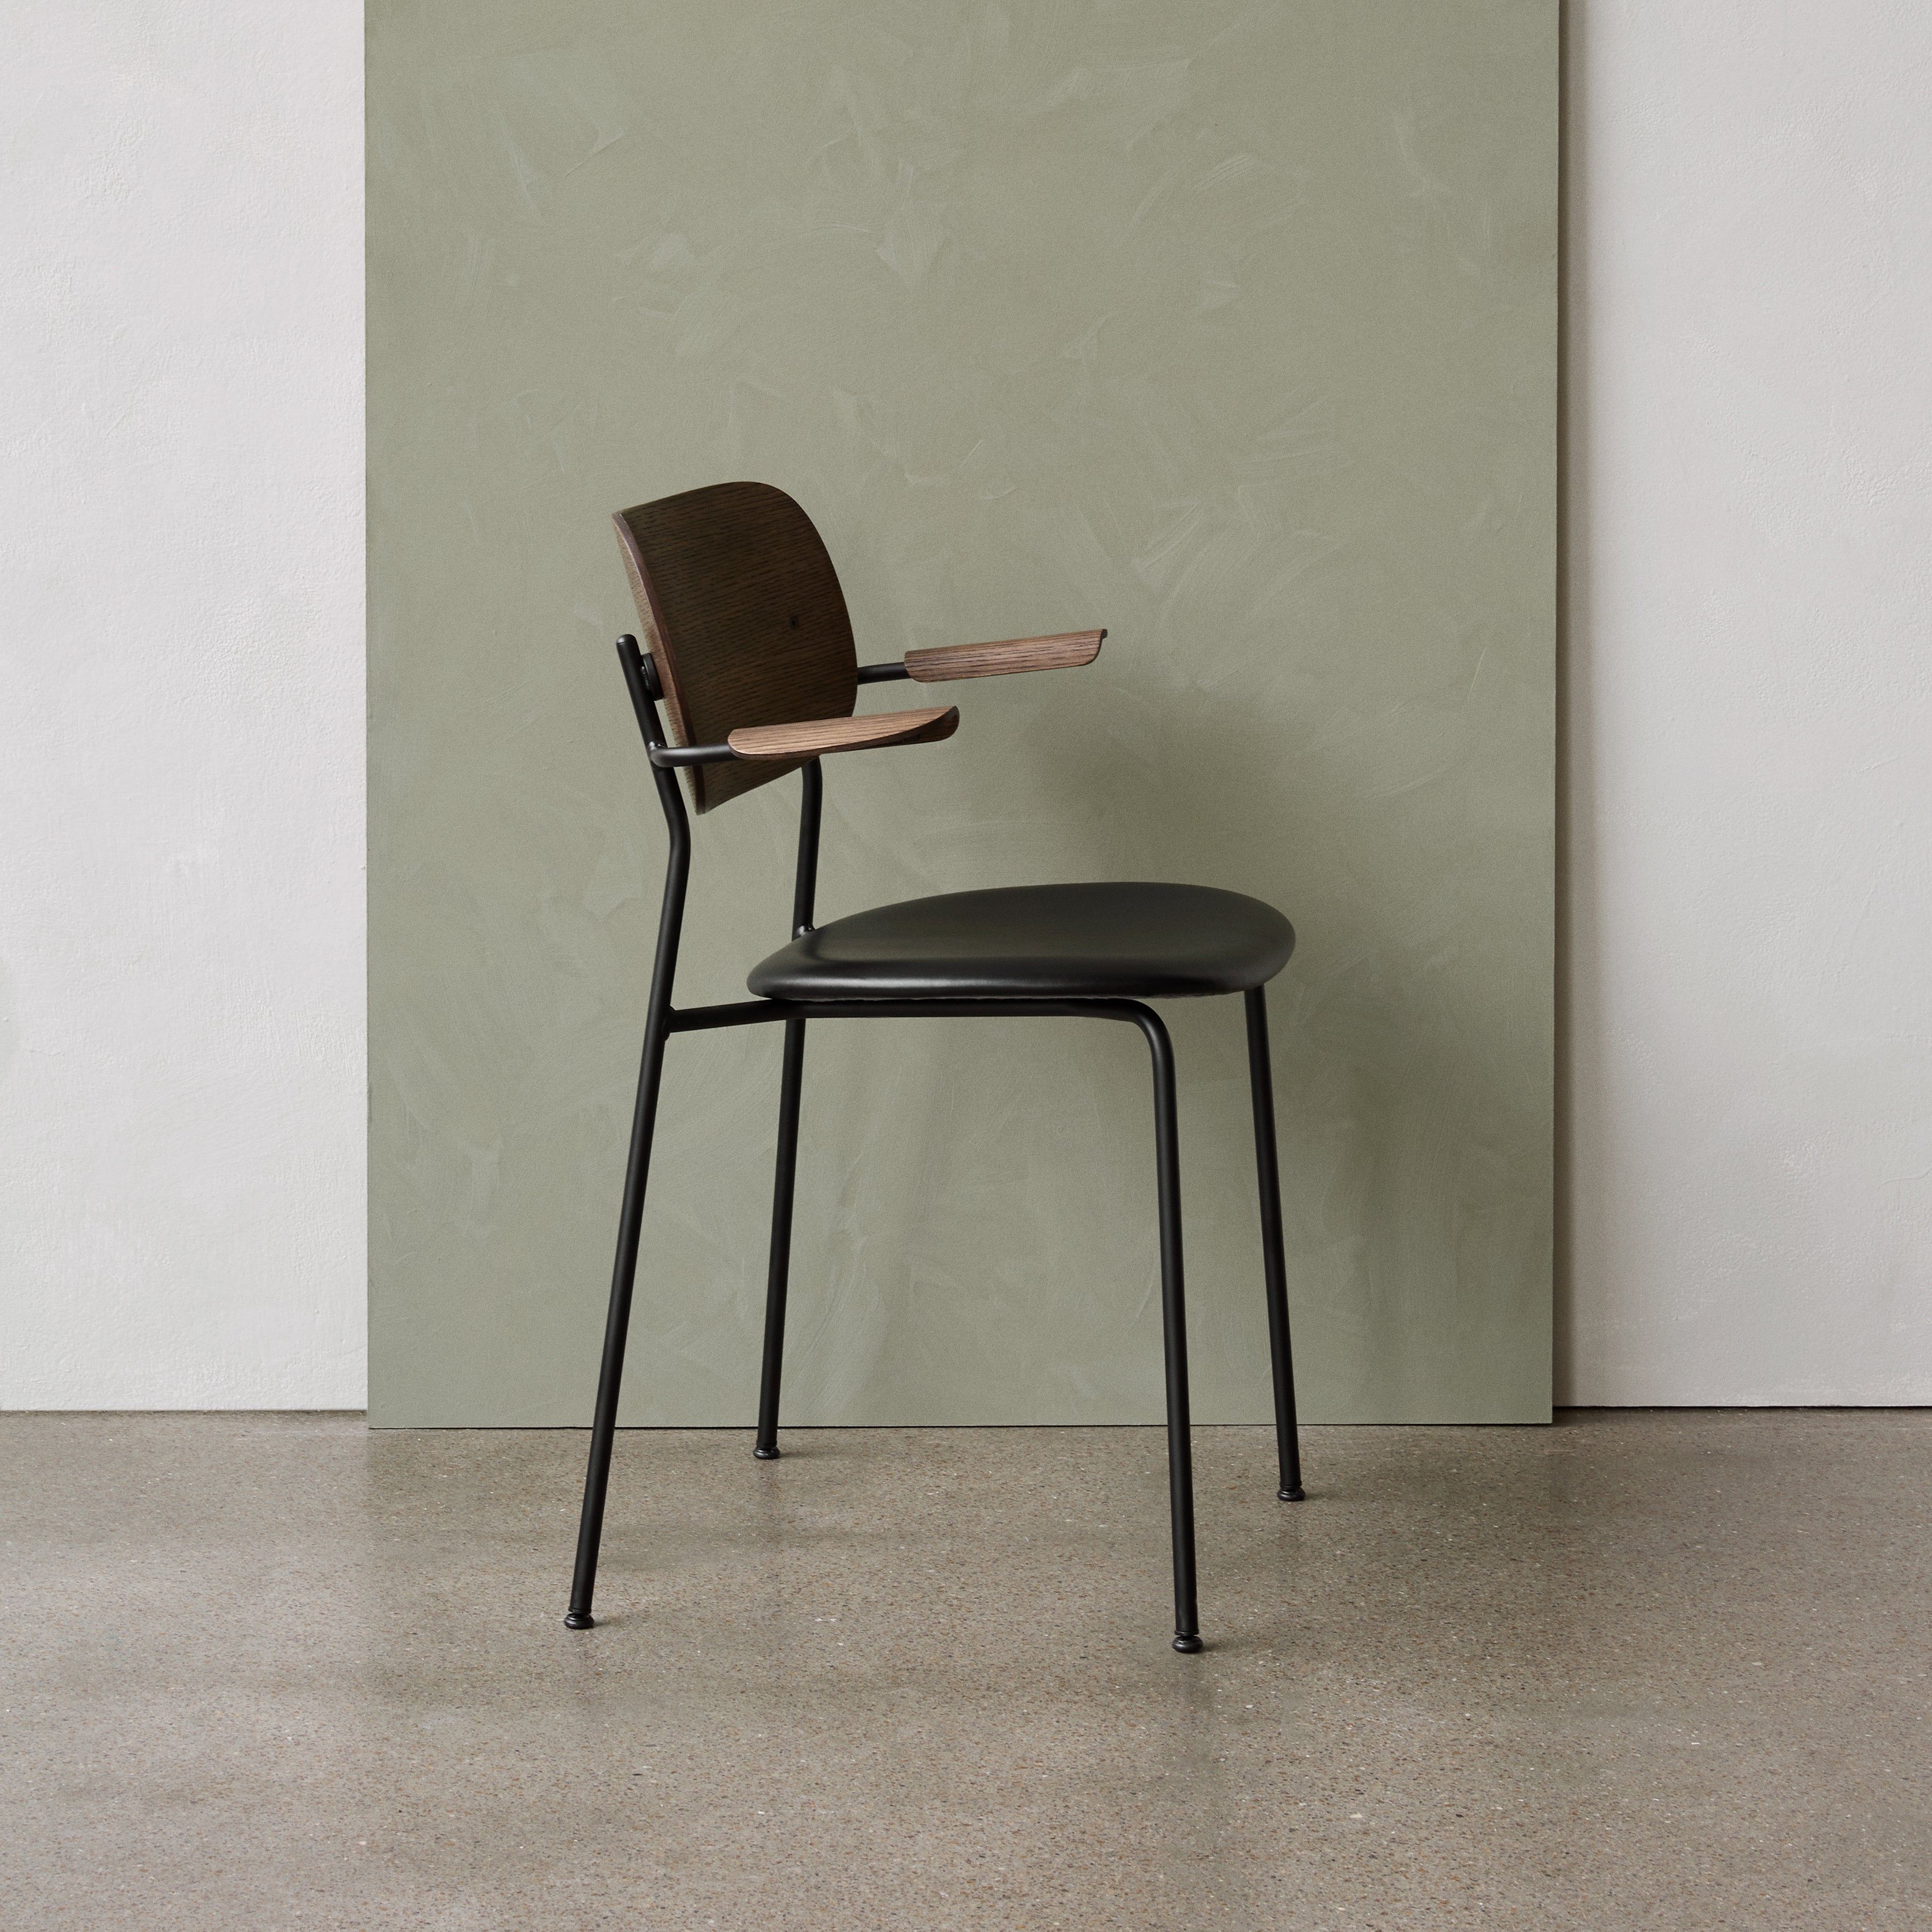 Co Dining Chair with Armrests: Seat Upholstered